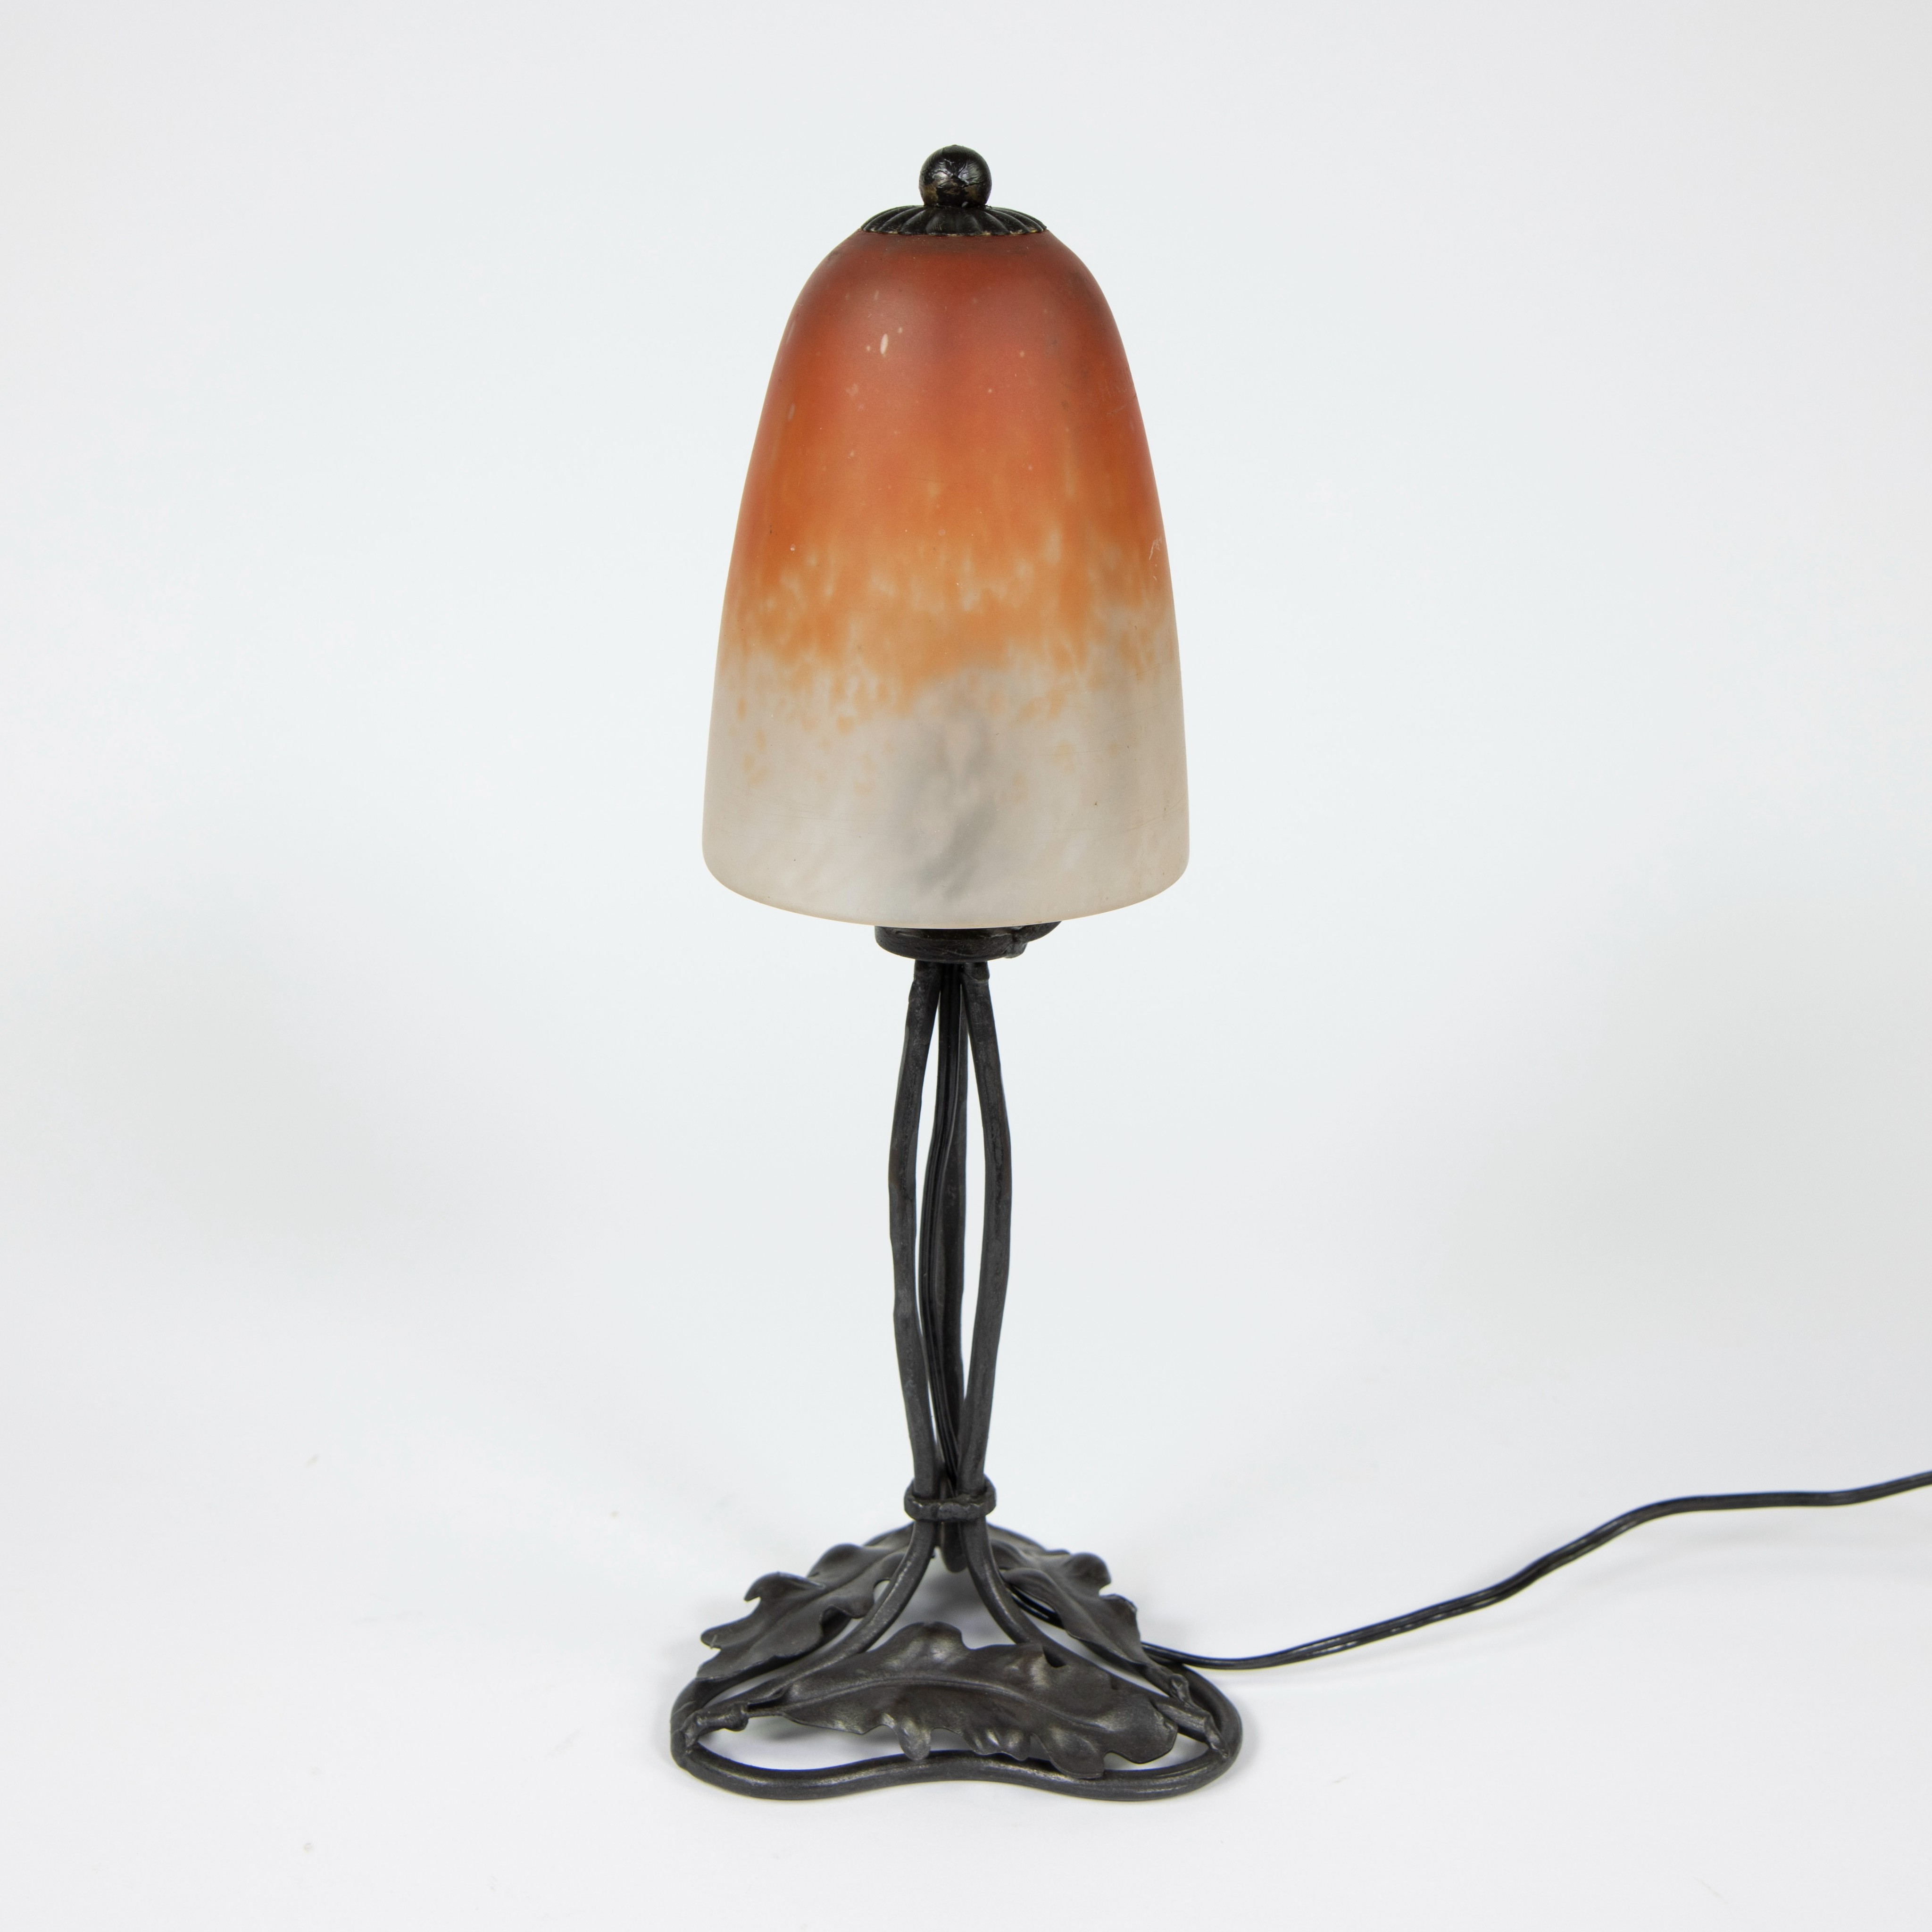 French SCHNEIDER Shade table lamp, wrought iron, signed.